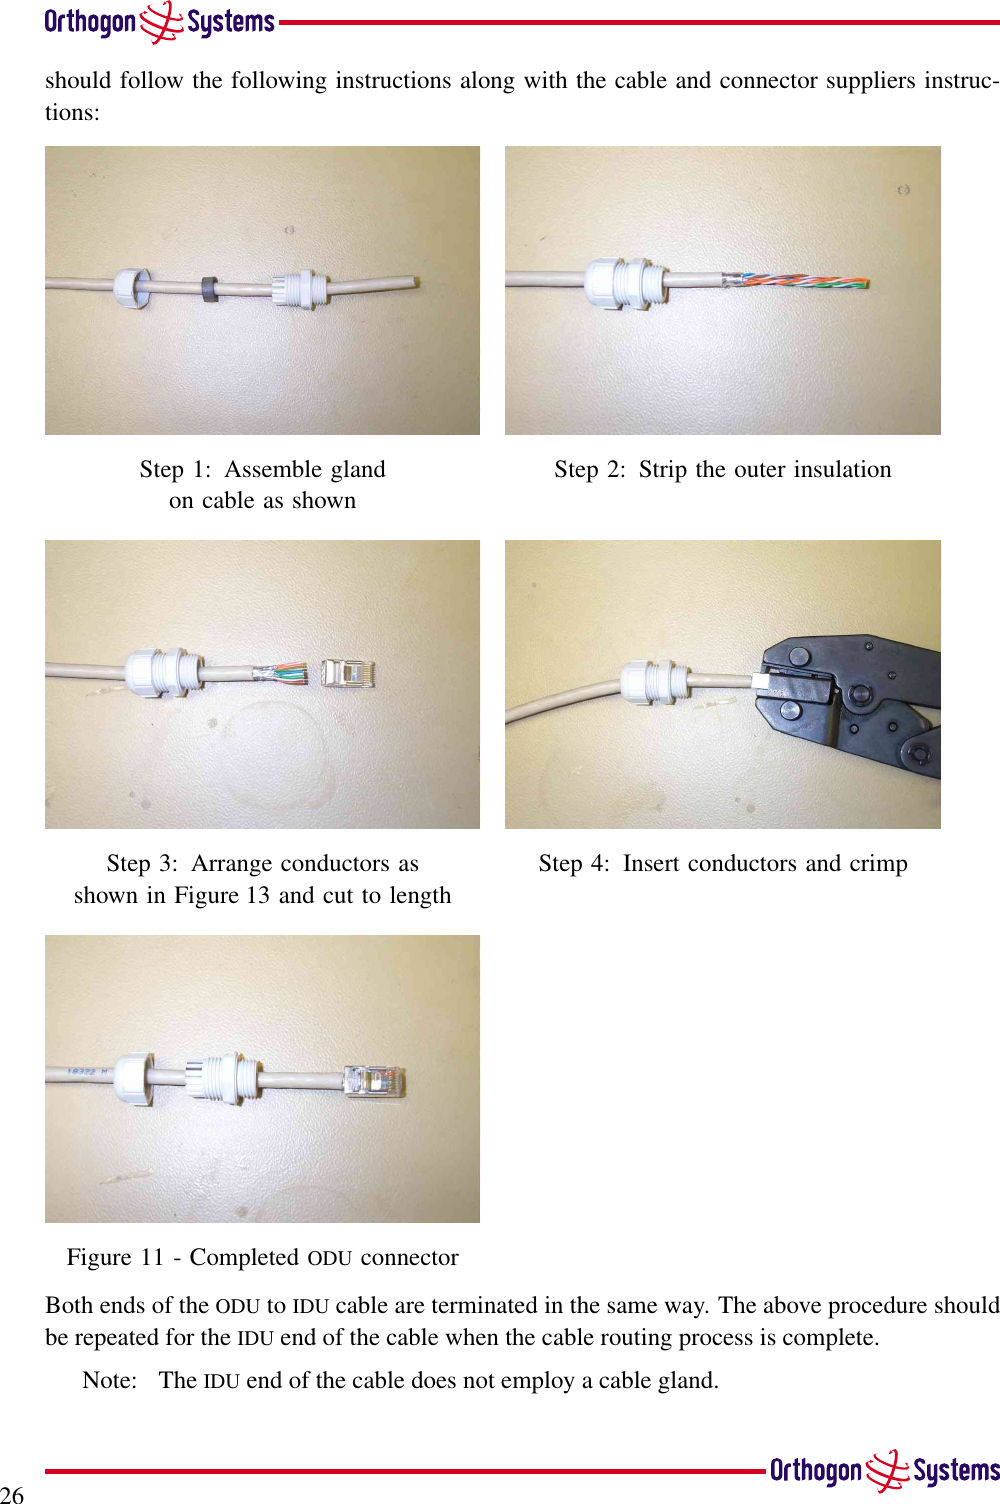 26should follow the following instructions along with the cable and connector suppliers instruc-tions:Step 1: Assemble glandon cable as shownStep 2: Strip the outer insulationStep 3: Arrange conductors asshown in Figure 13 and cut to lengthStep 4: Insert conductors and crimpFigure 11 - Completed ODU connectorBoth ends of the ODU to IDU cable are terminated in the same way. The above procedure shouldbe repeated for the IDU end of the cable when the cable routing process is complete.Note: The IDU end of the cable does not employ a cable gland.